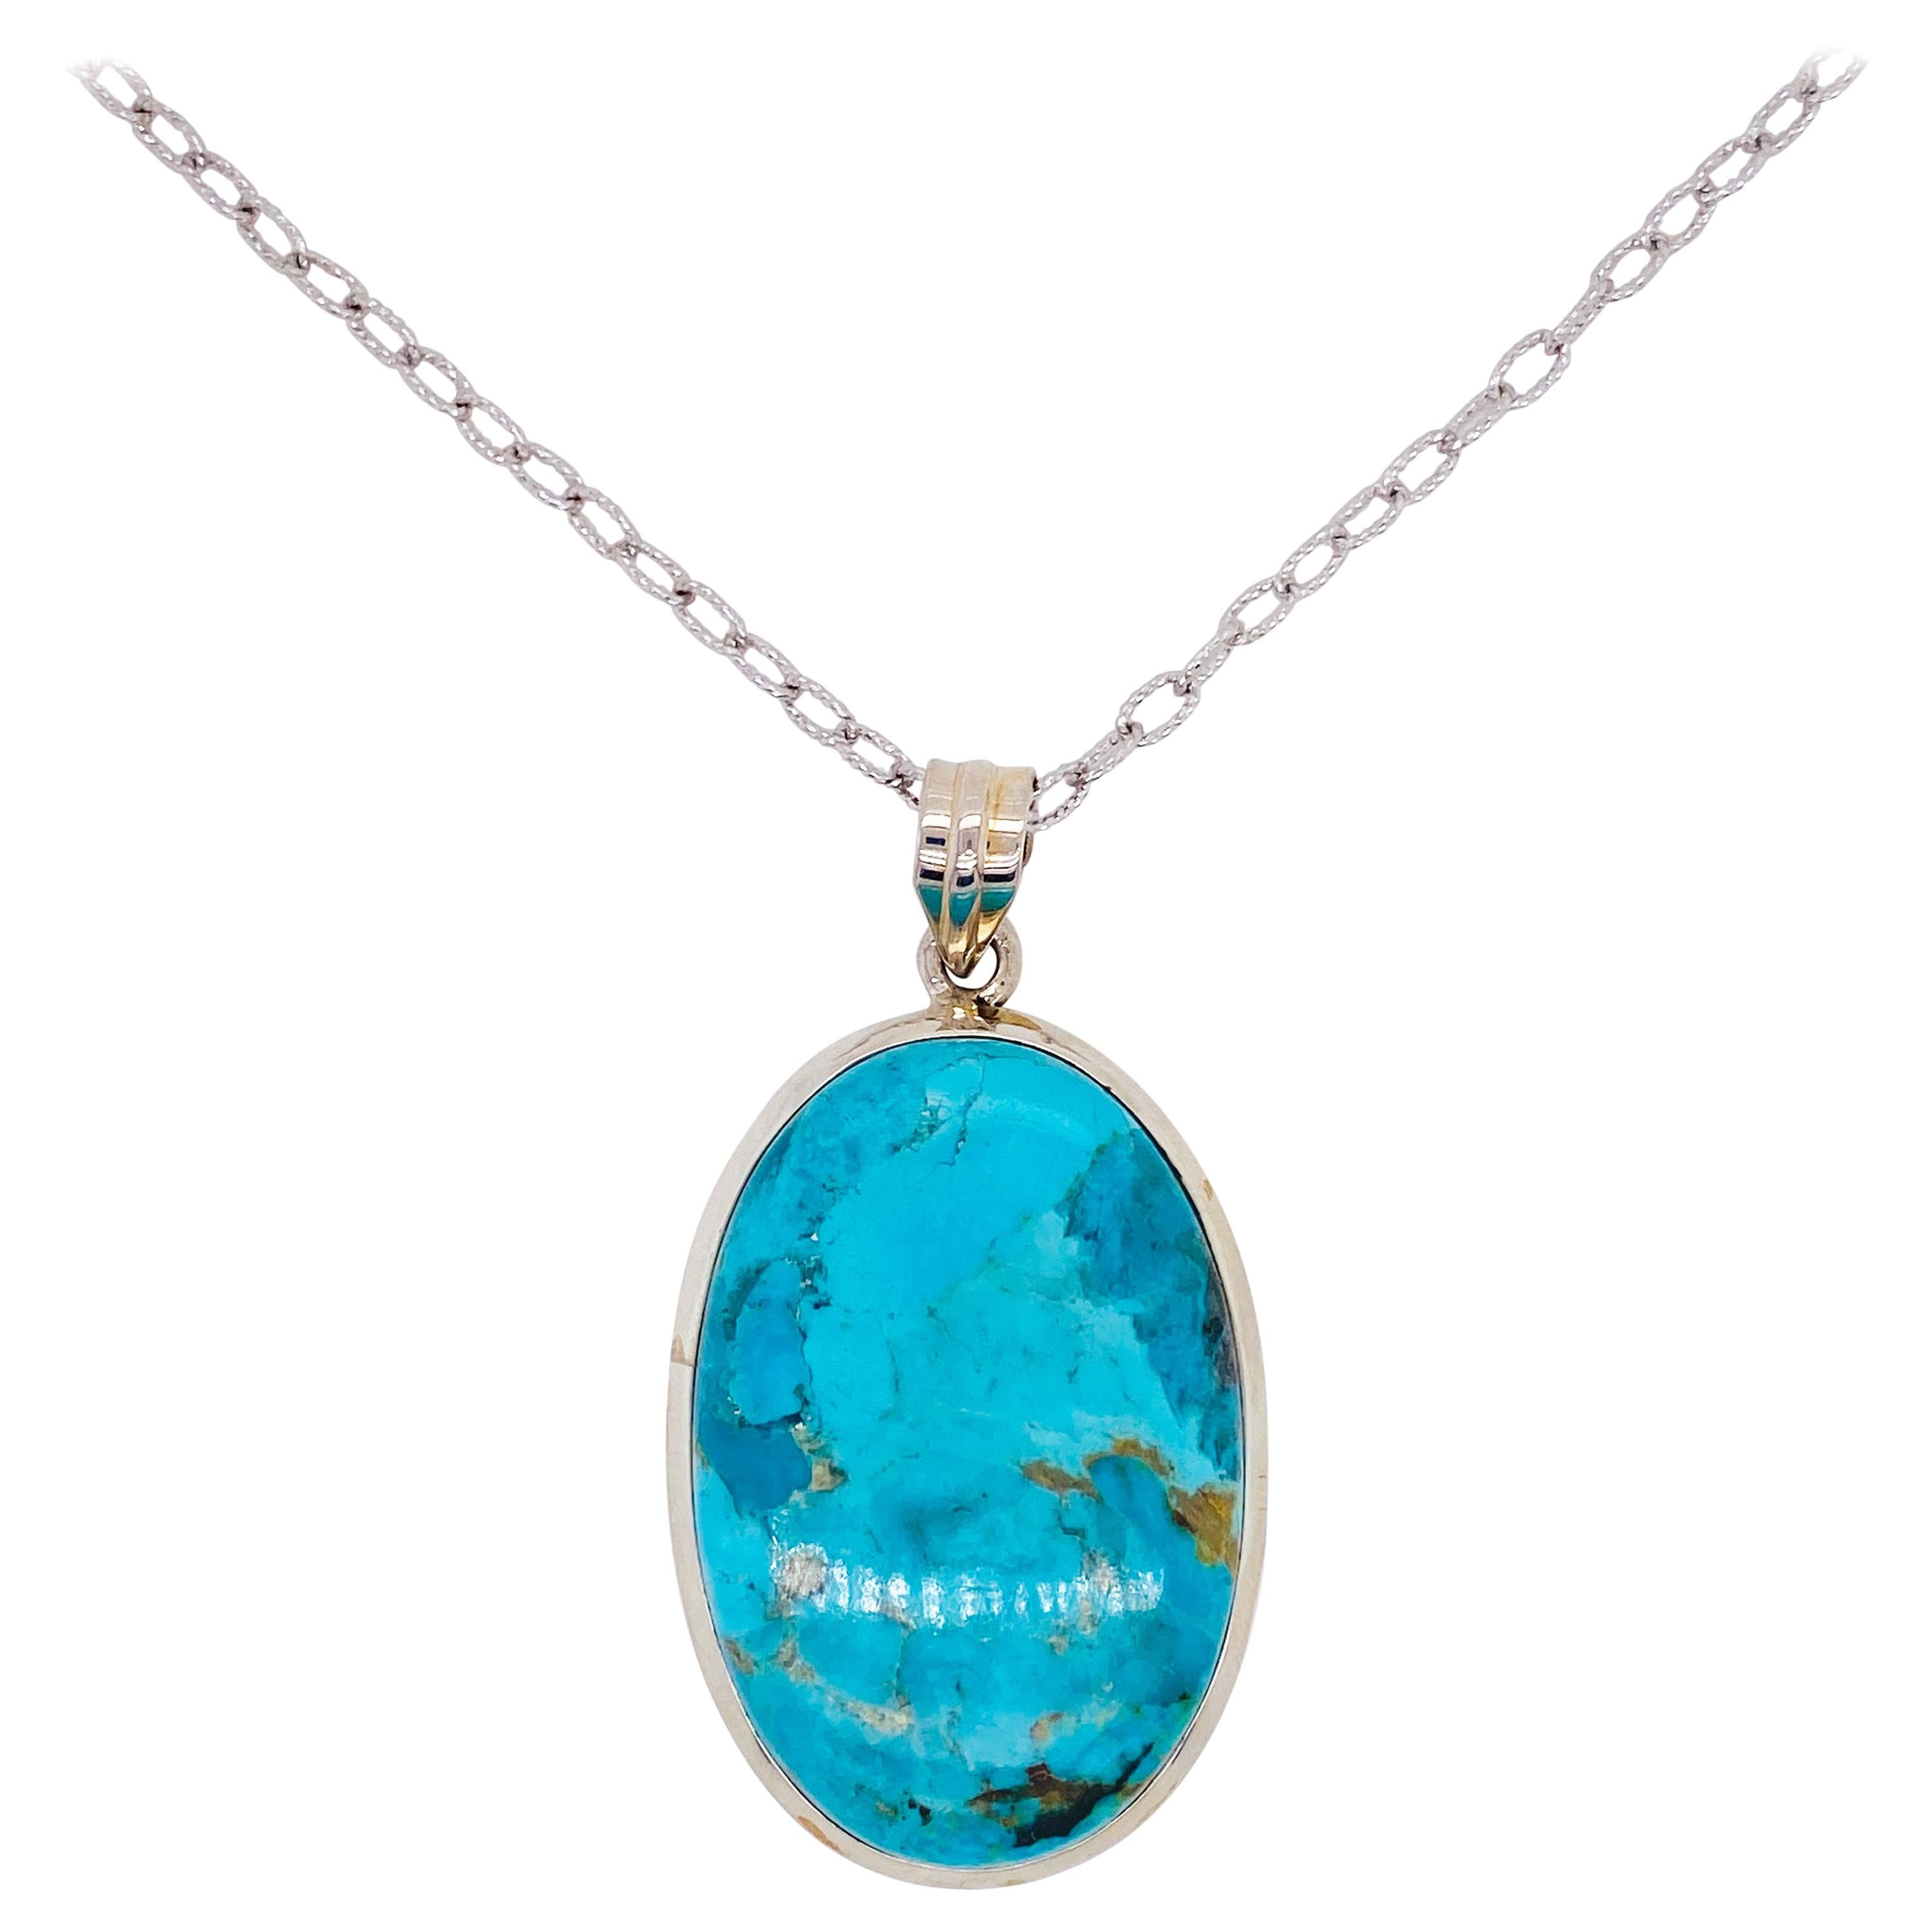 Organic Turquoise Pendant in Sterling Silver w Handmade Bezel w Oval Cable Chain